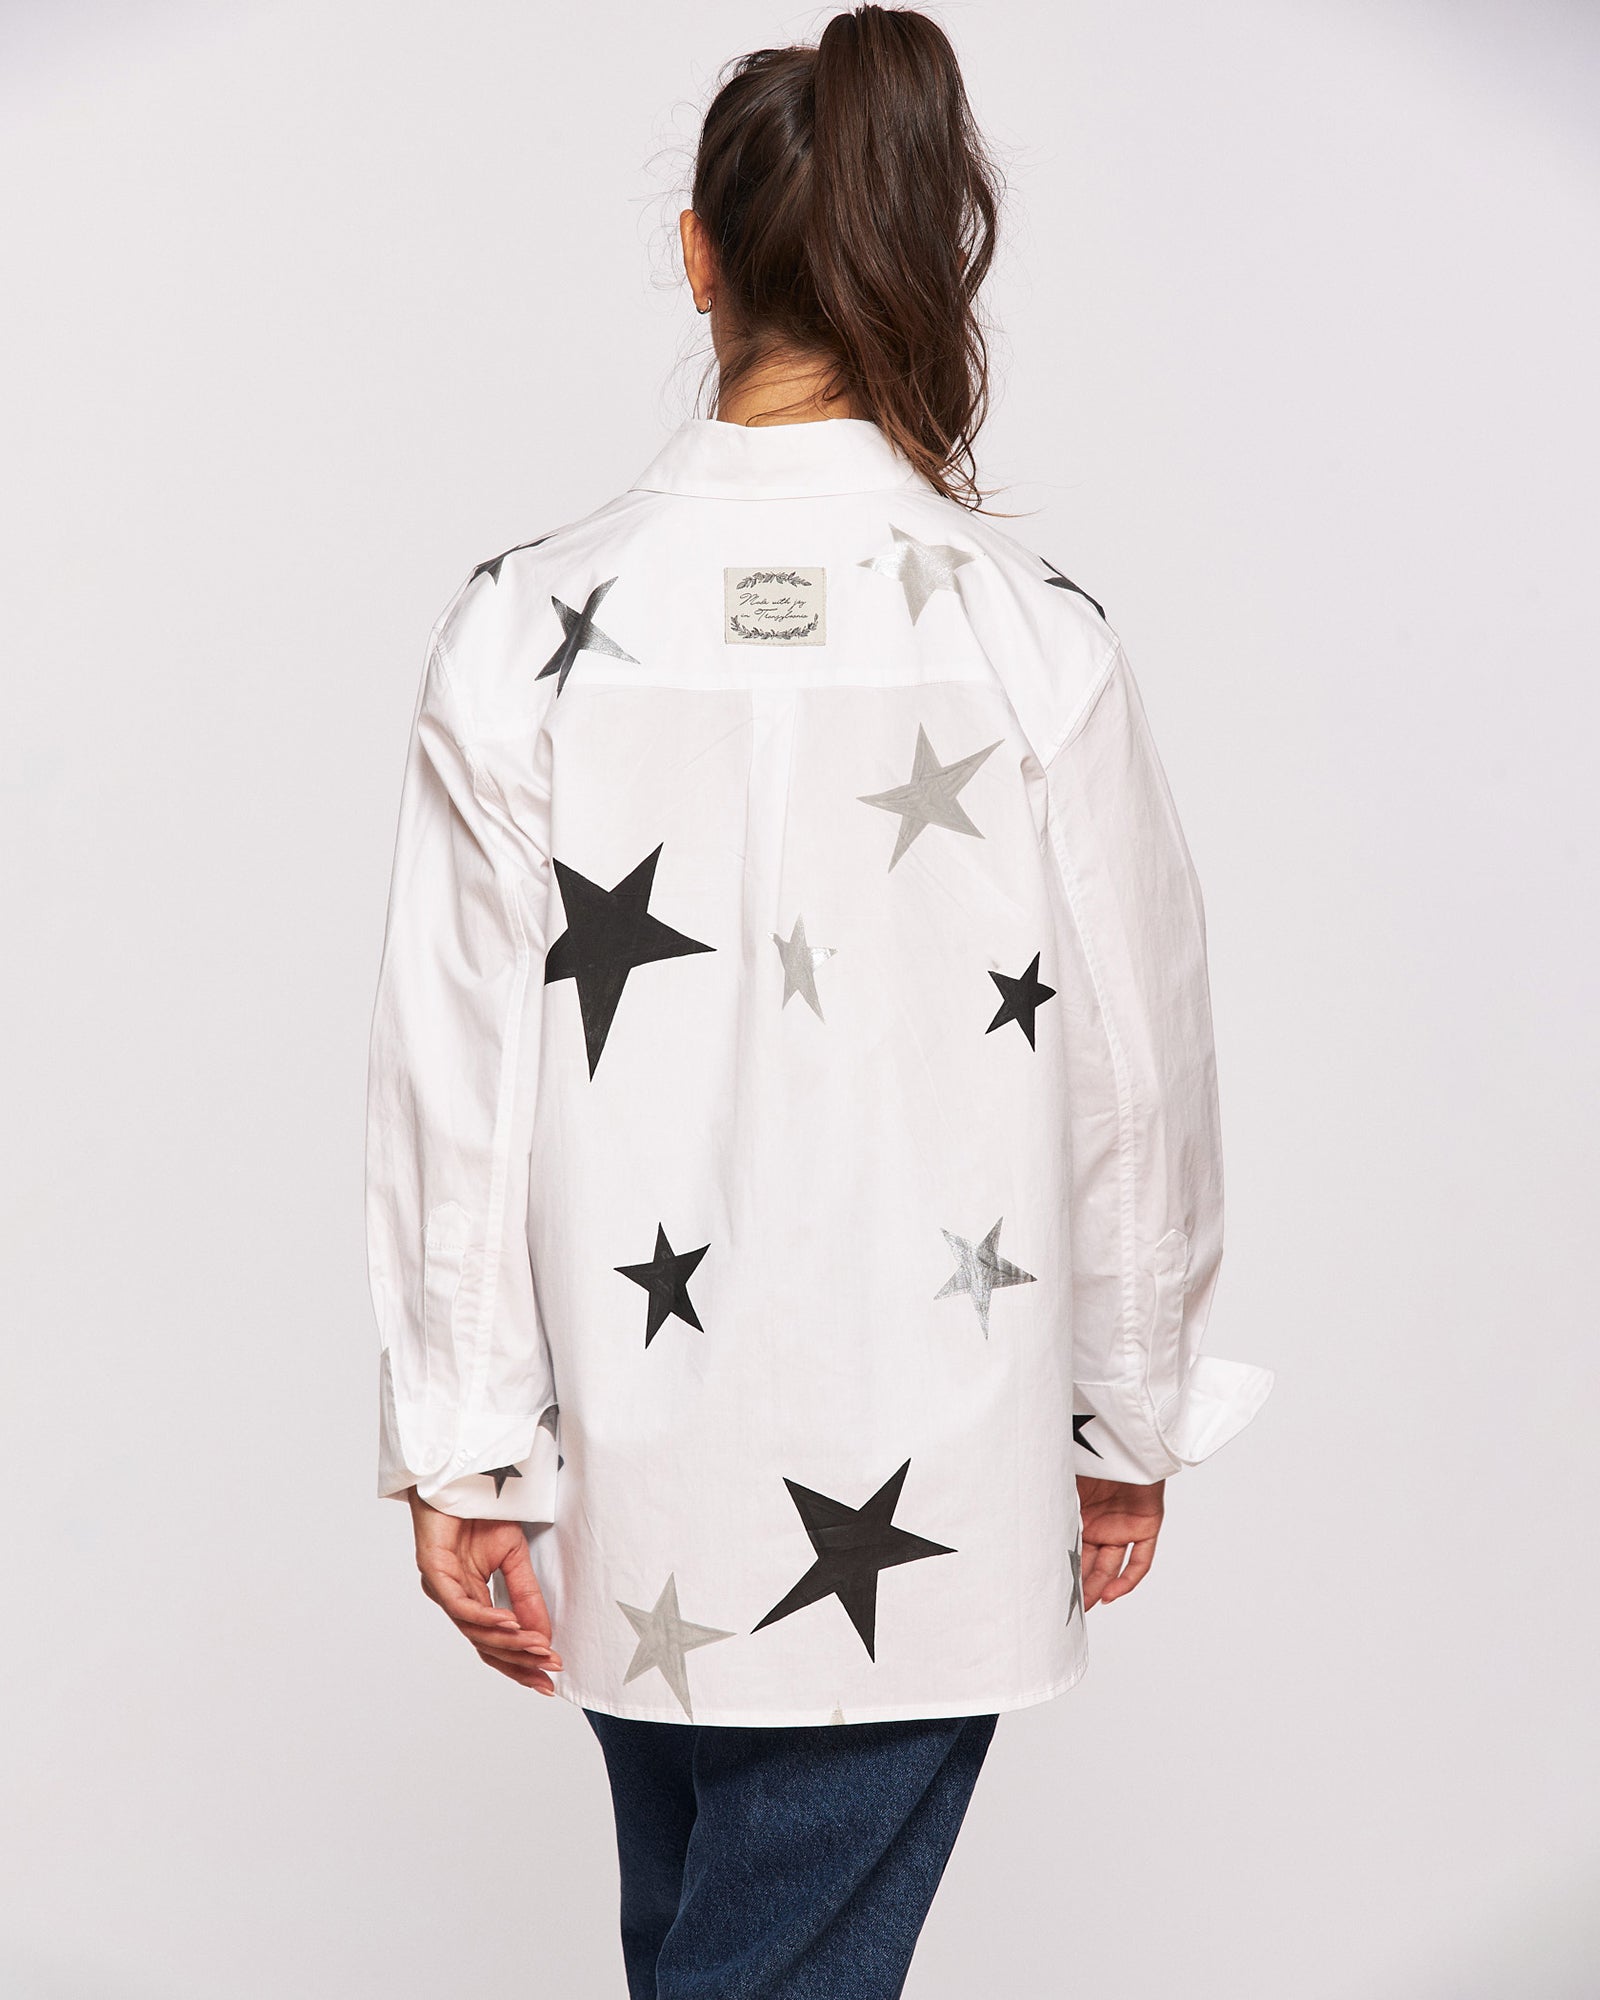 "It's written in the stars" hand painted shirt